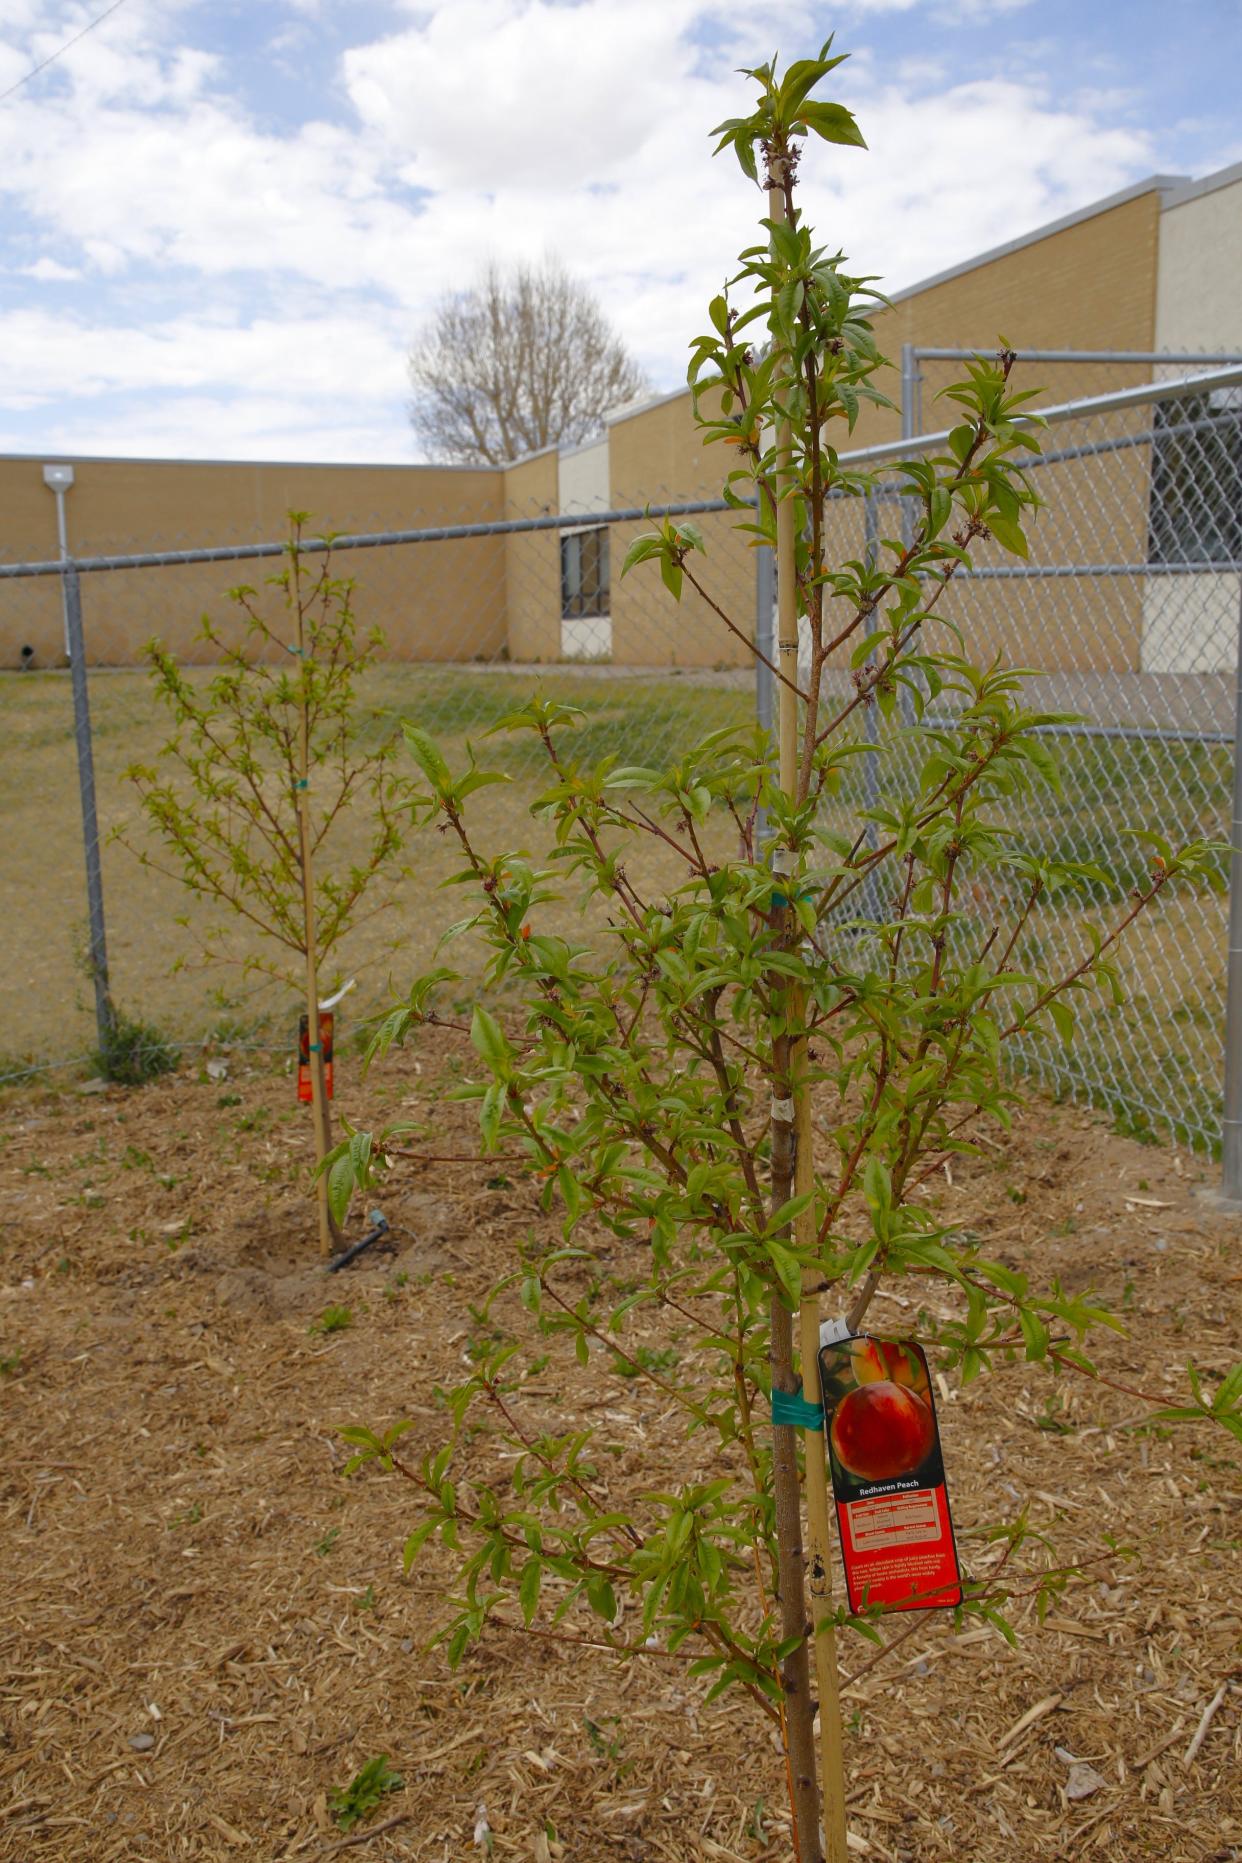 A small orchard of five fruit trees, including this redhaven peach tree, is part of the community garden at Animas Elementary School in Farmington.